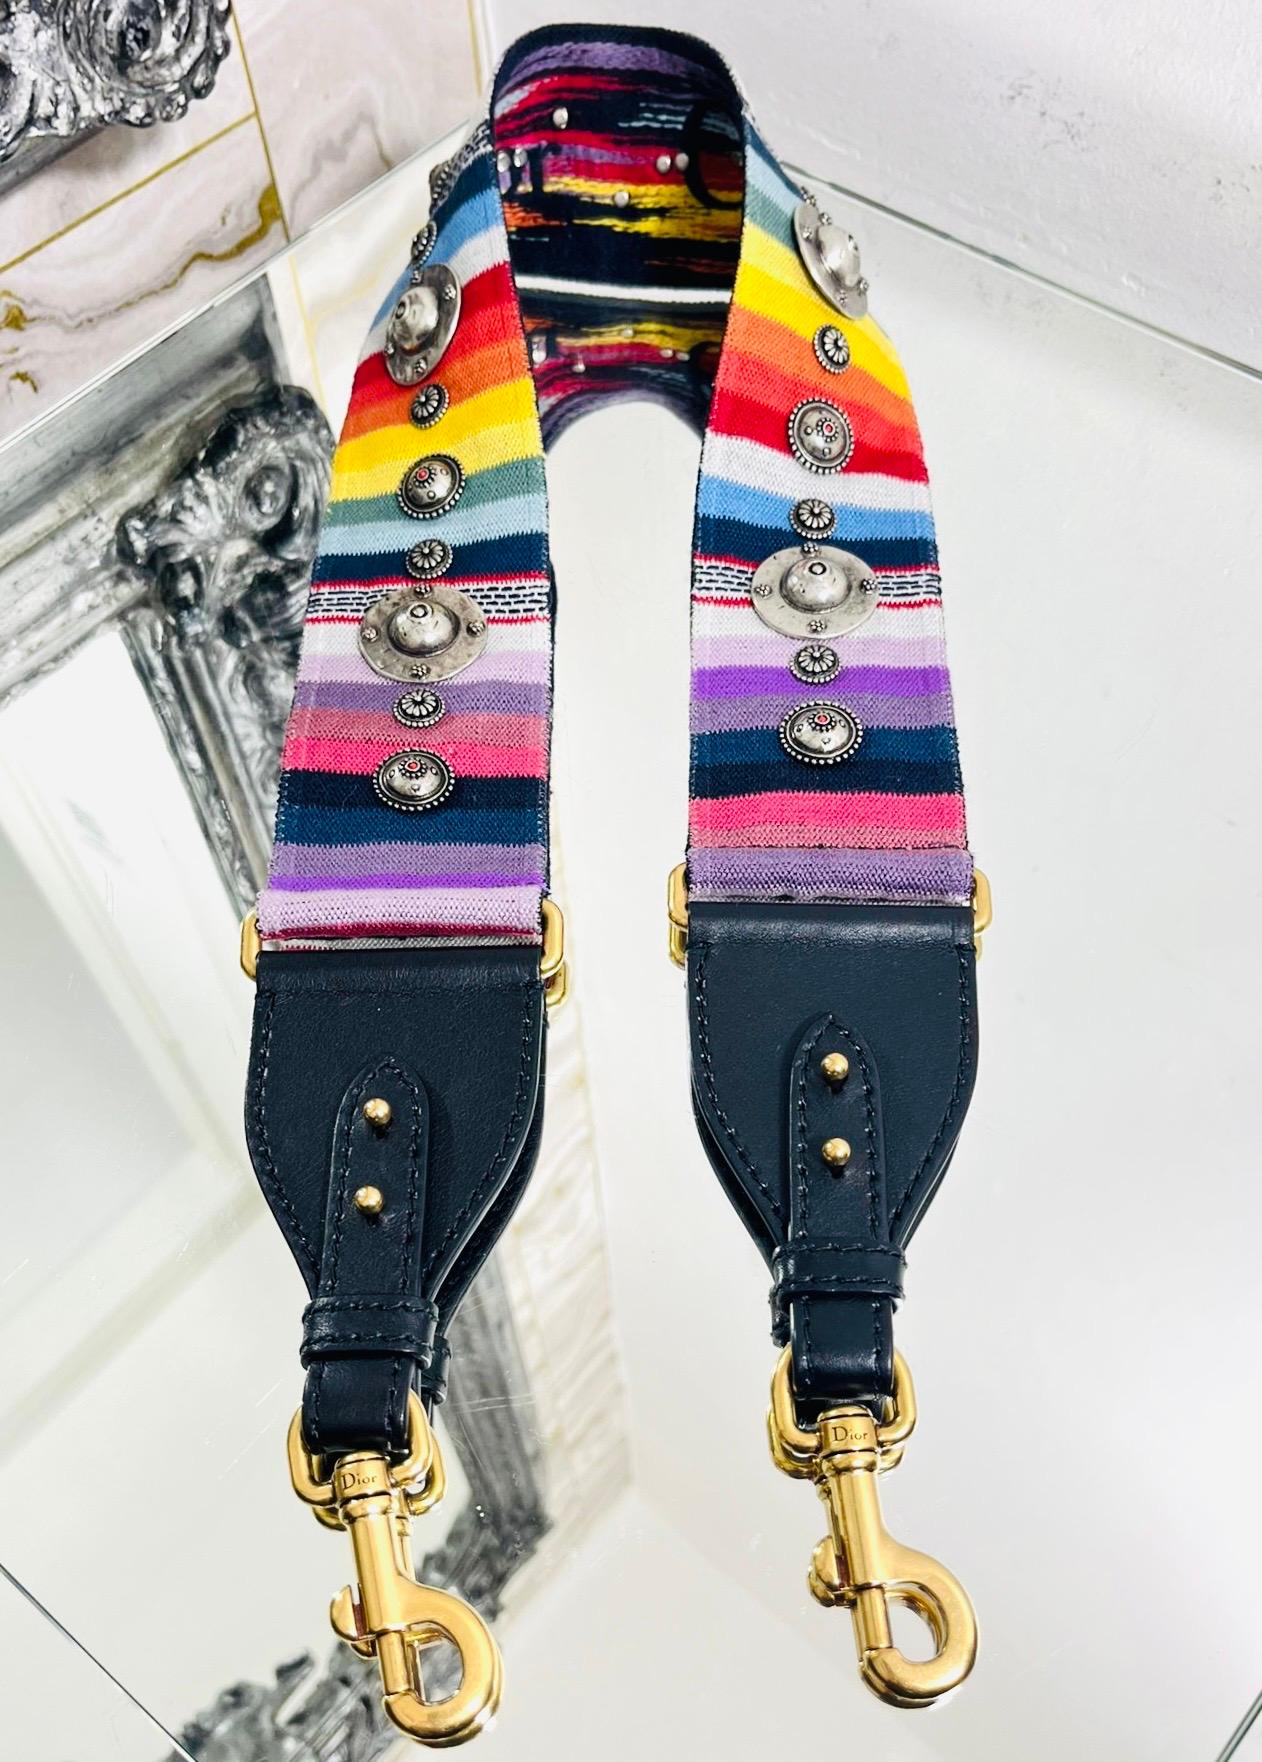 Christian Dior Studded Rainbow Bag Strap

Multicoloured shoulder strap studded with silver medallions and designed with 'Christian Dior' embroidery on the reverse.

Featuring black leather ends with aged gold 'Dior' engraved clasps.

Size – One